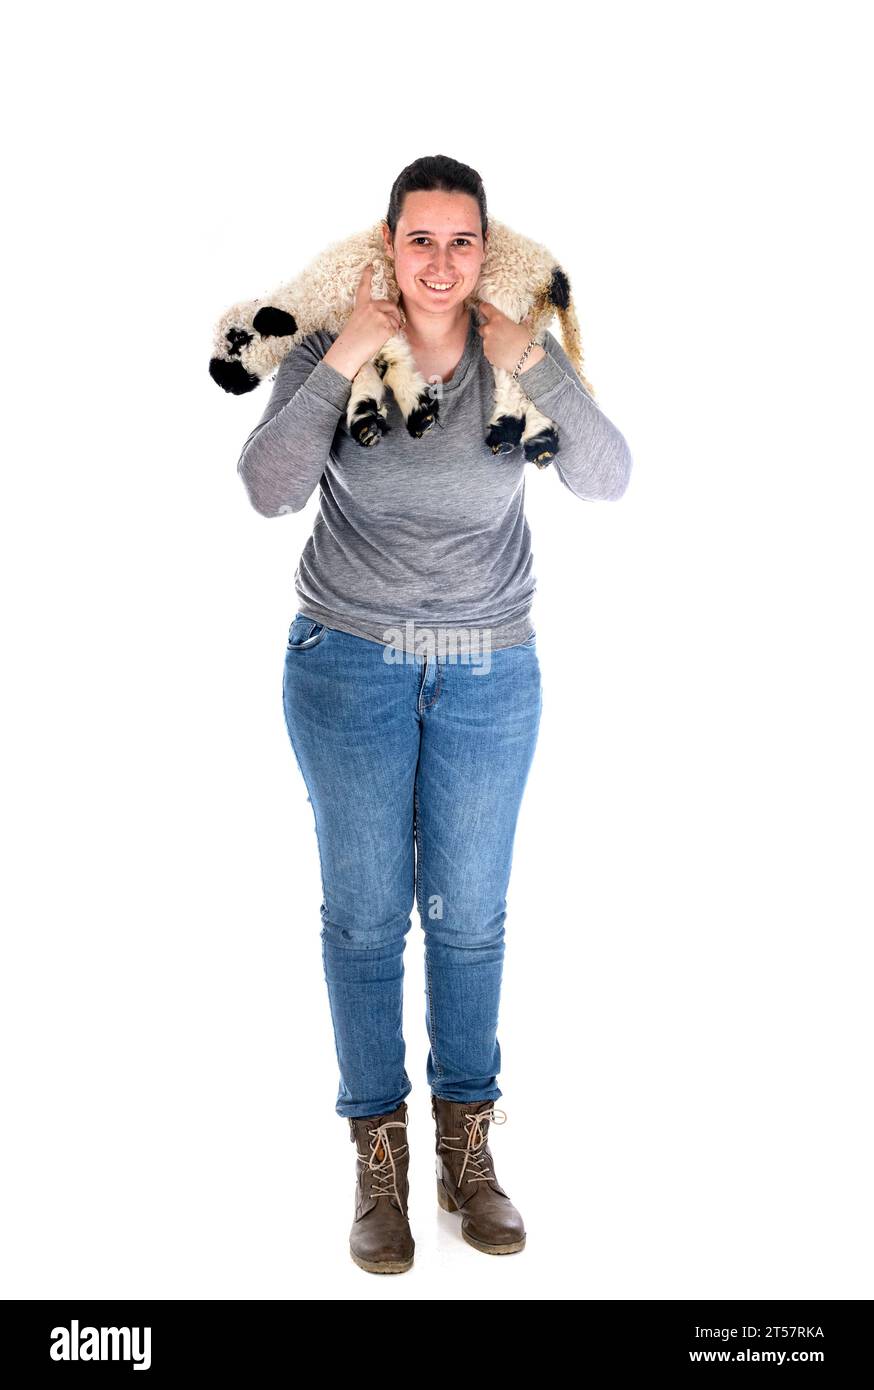 lamb Valais Blacknose and woman farmer in front of white background Stock Photo